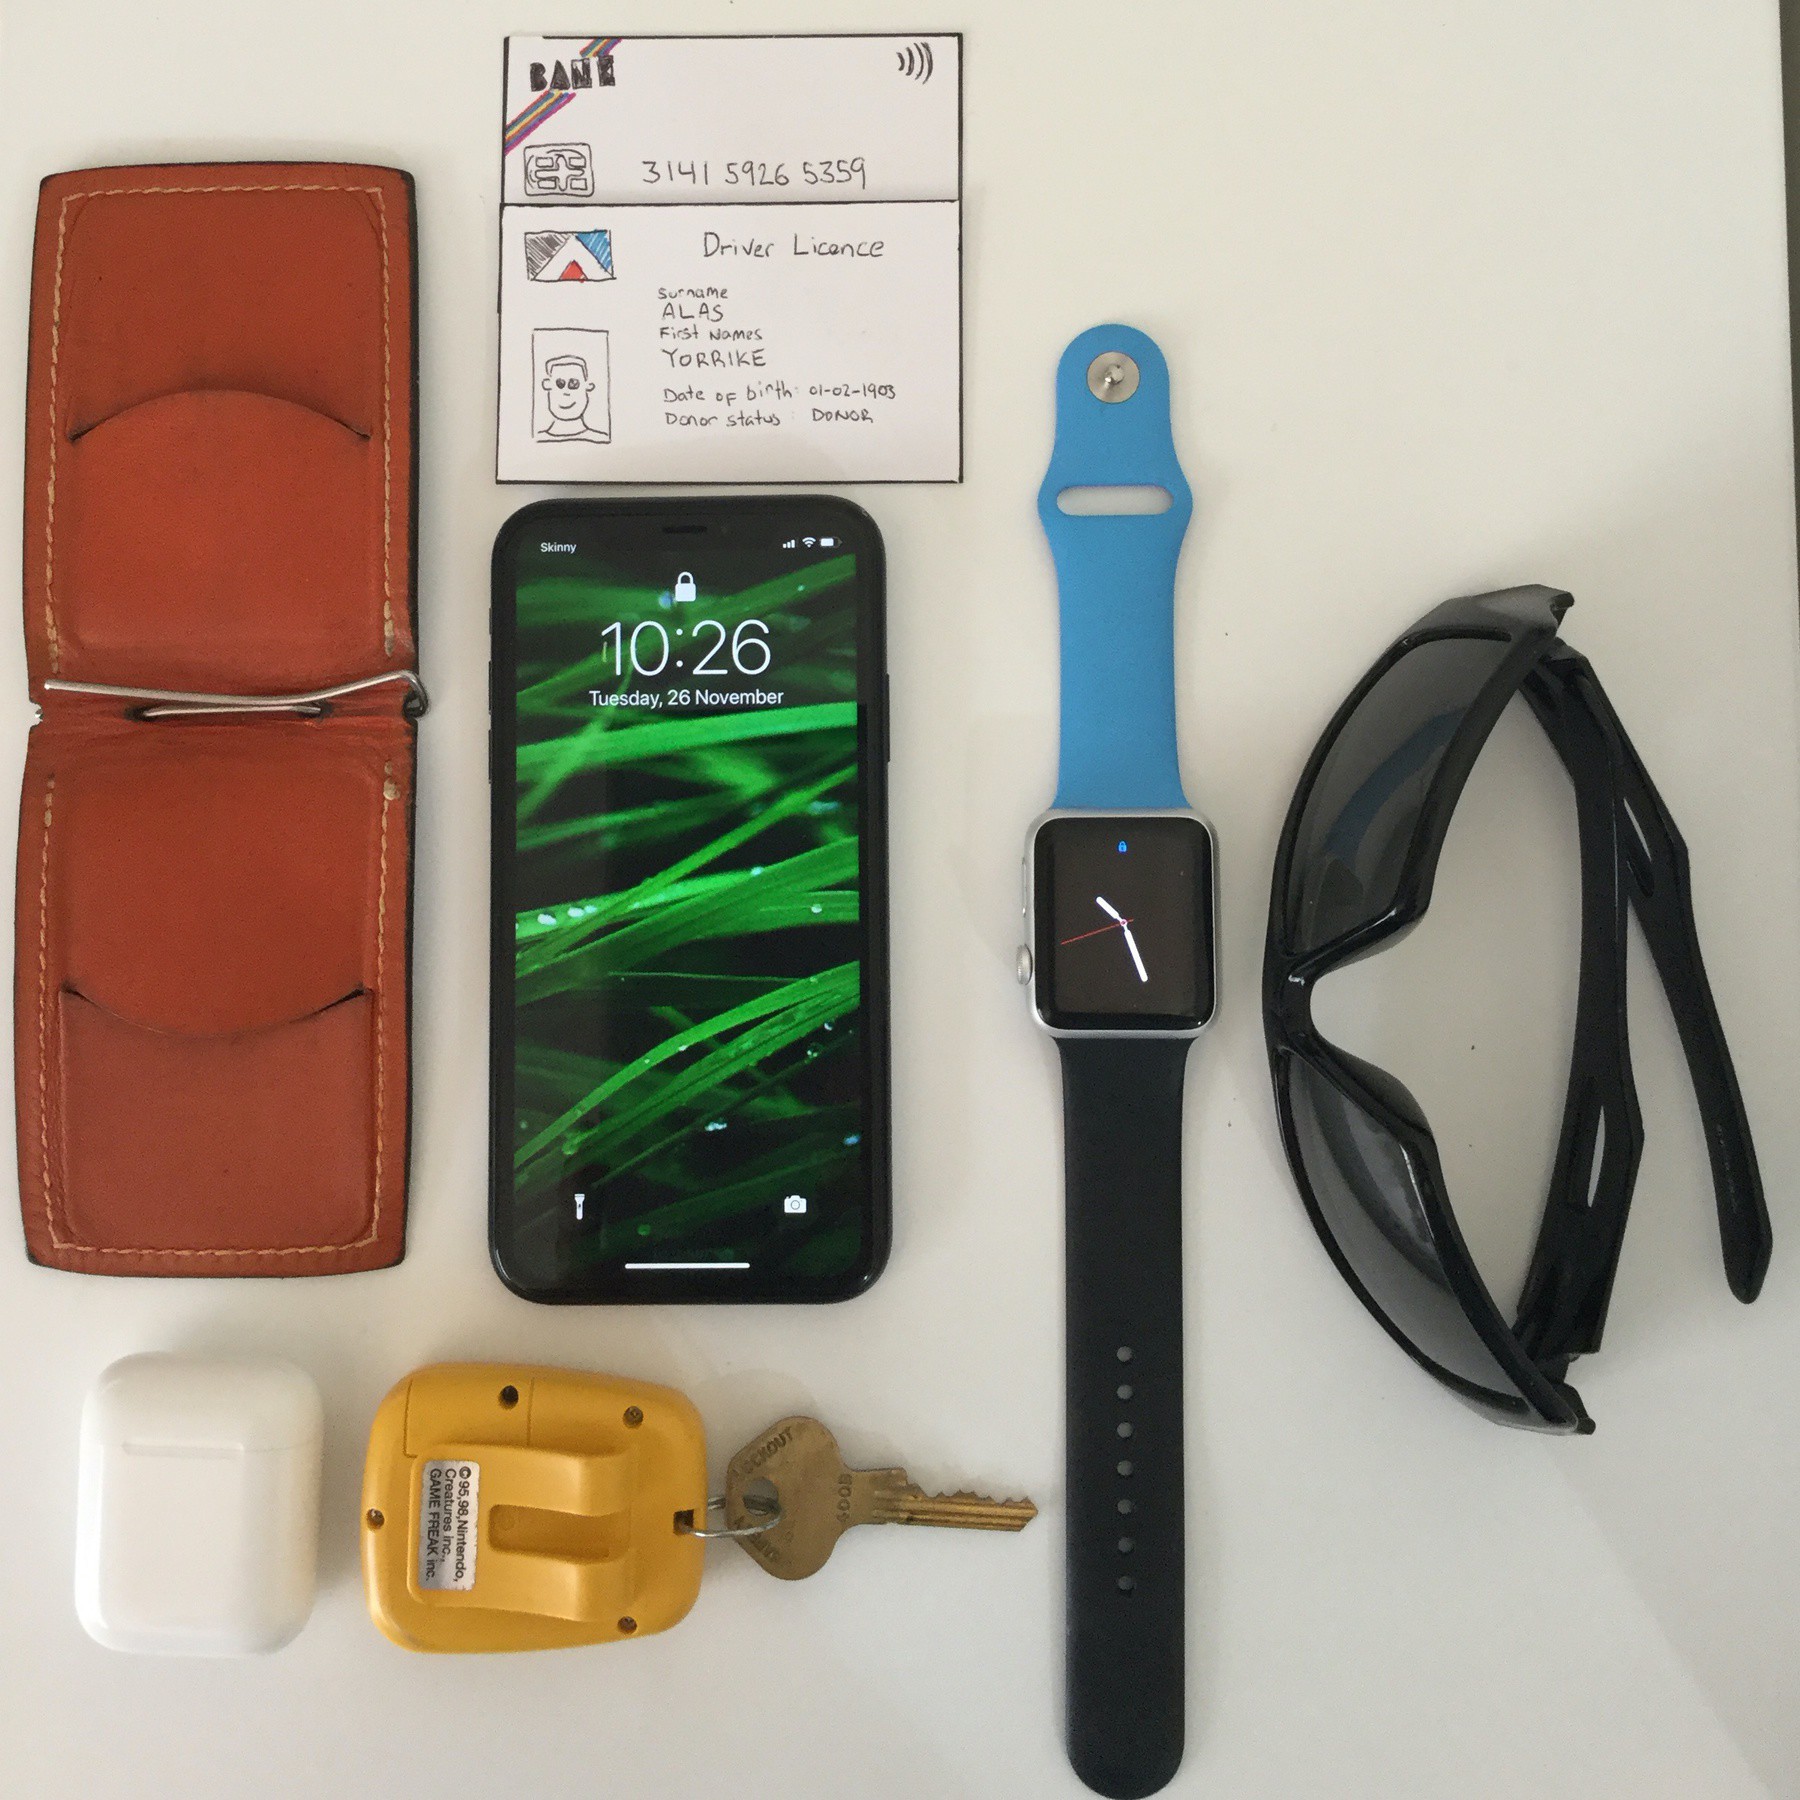 A picture of my thin wallet, phone, keys, airpods, sunglasses and cards I carry around daily.